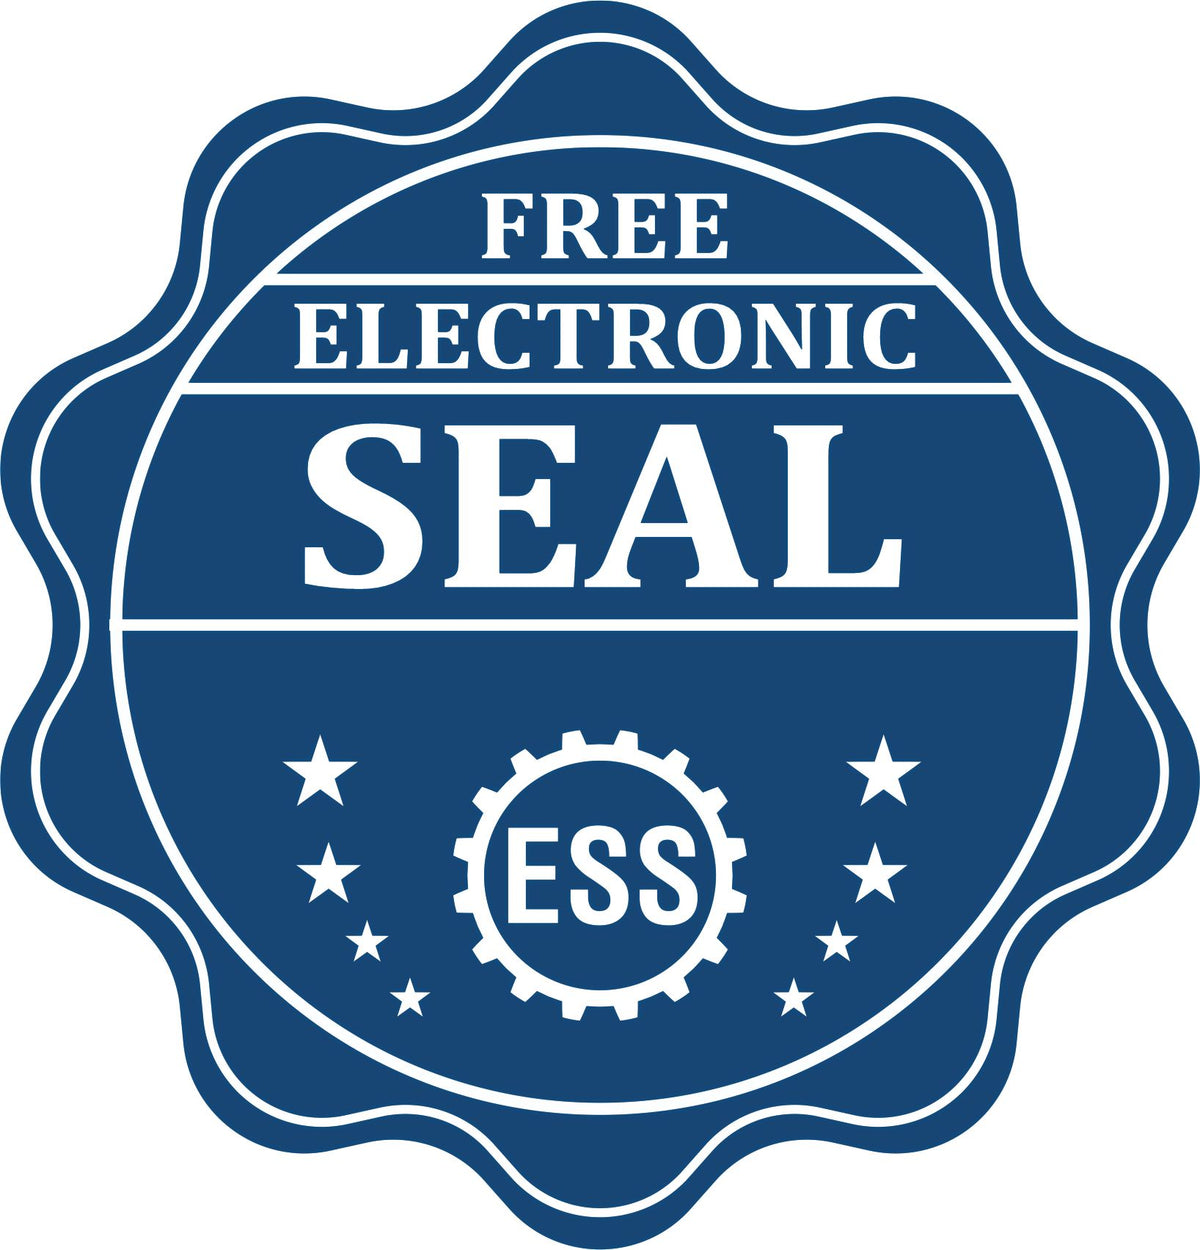 A badge showing a free electronic seal for the Soft Delaware Professional Geologist Seal with stars and the ESS gear on the emblem.